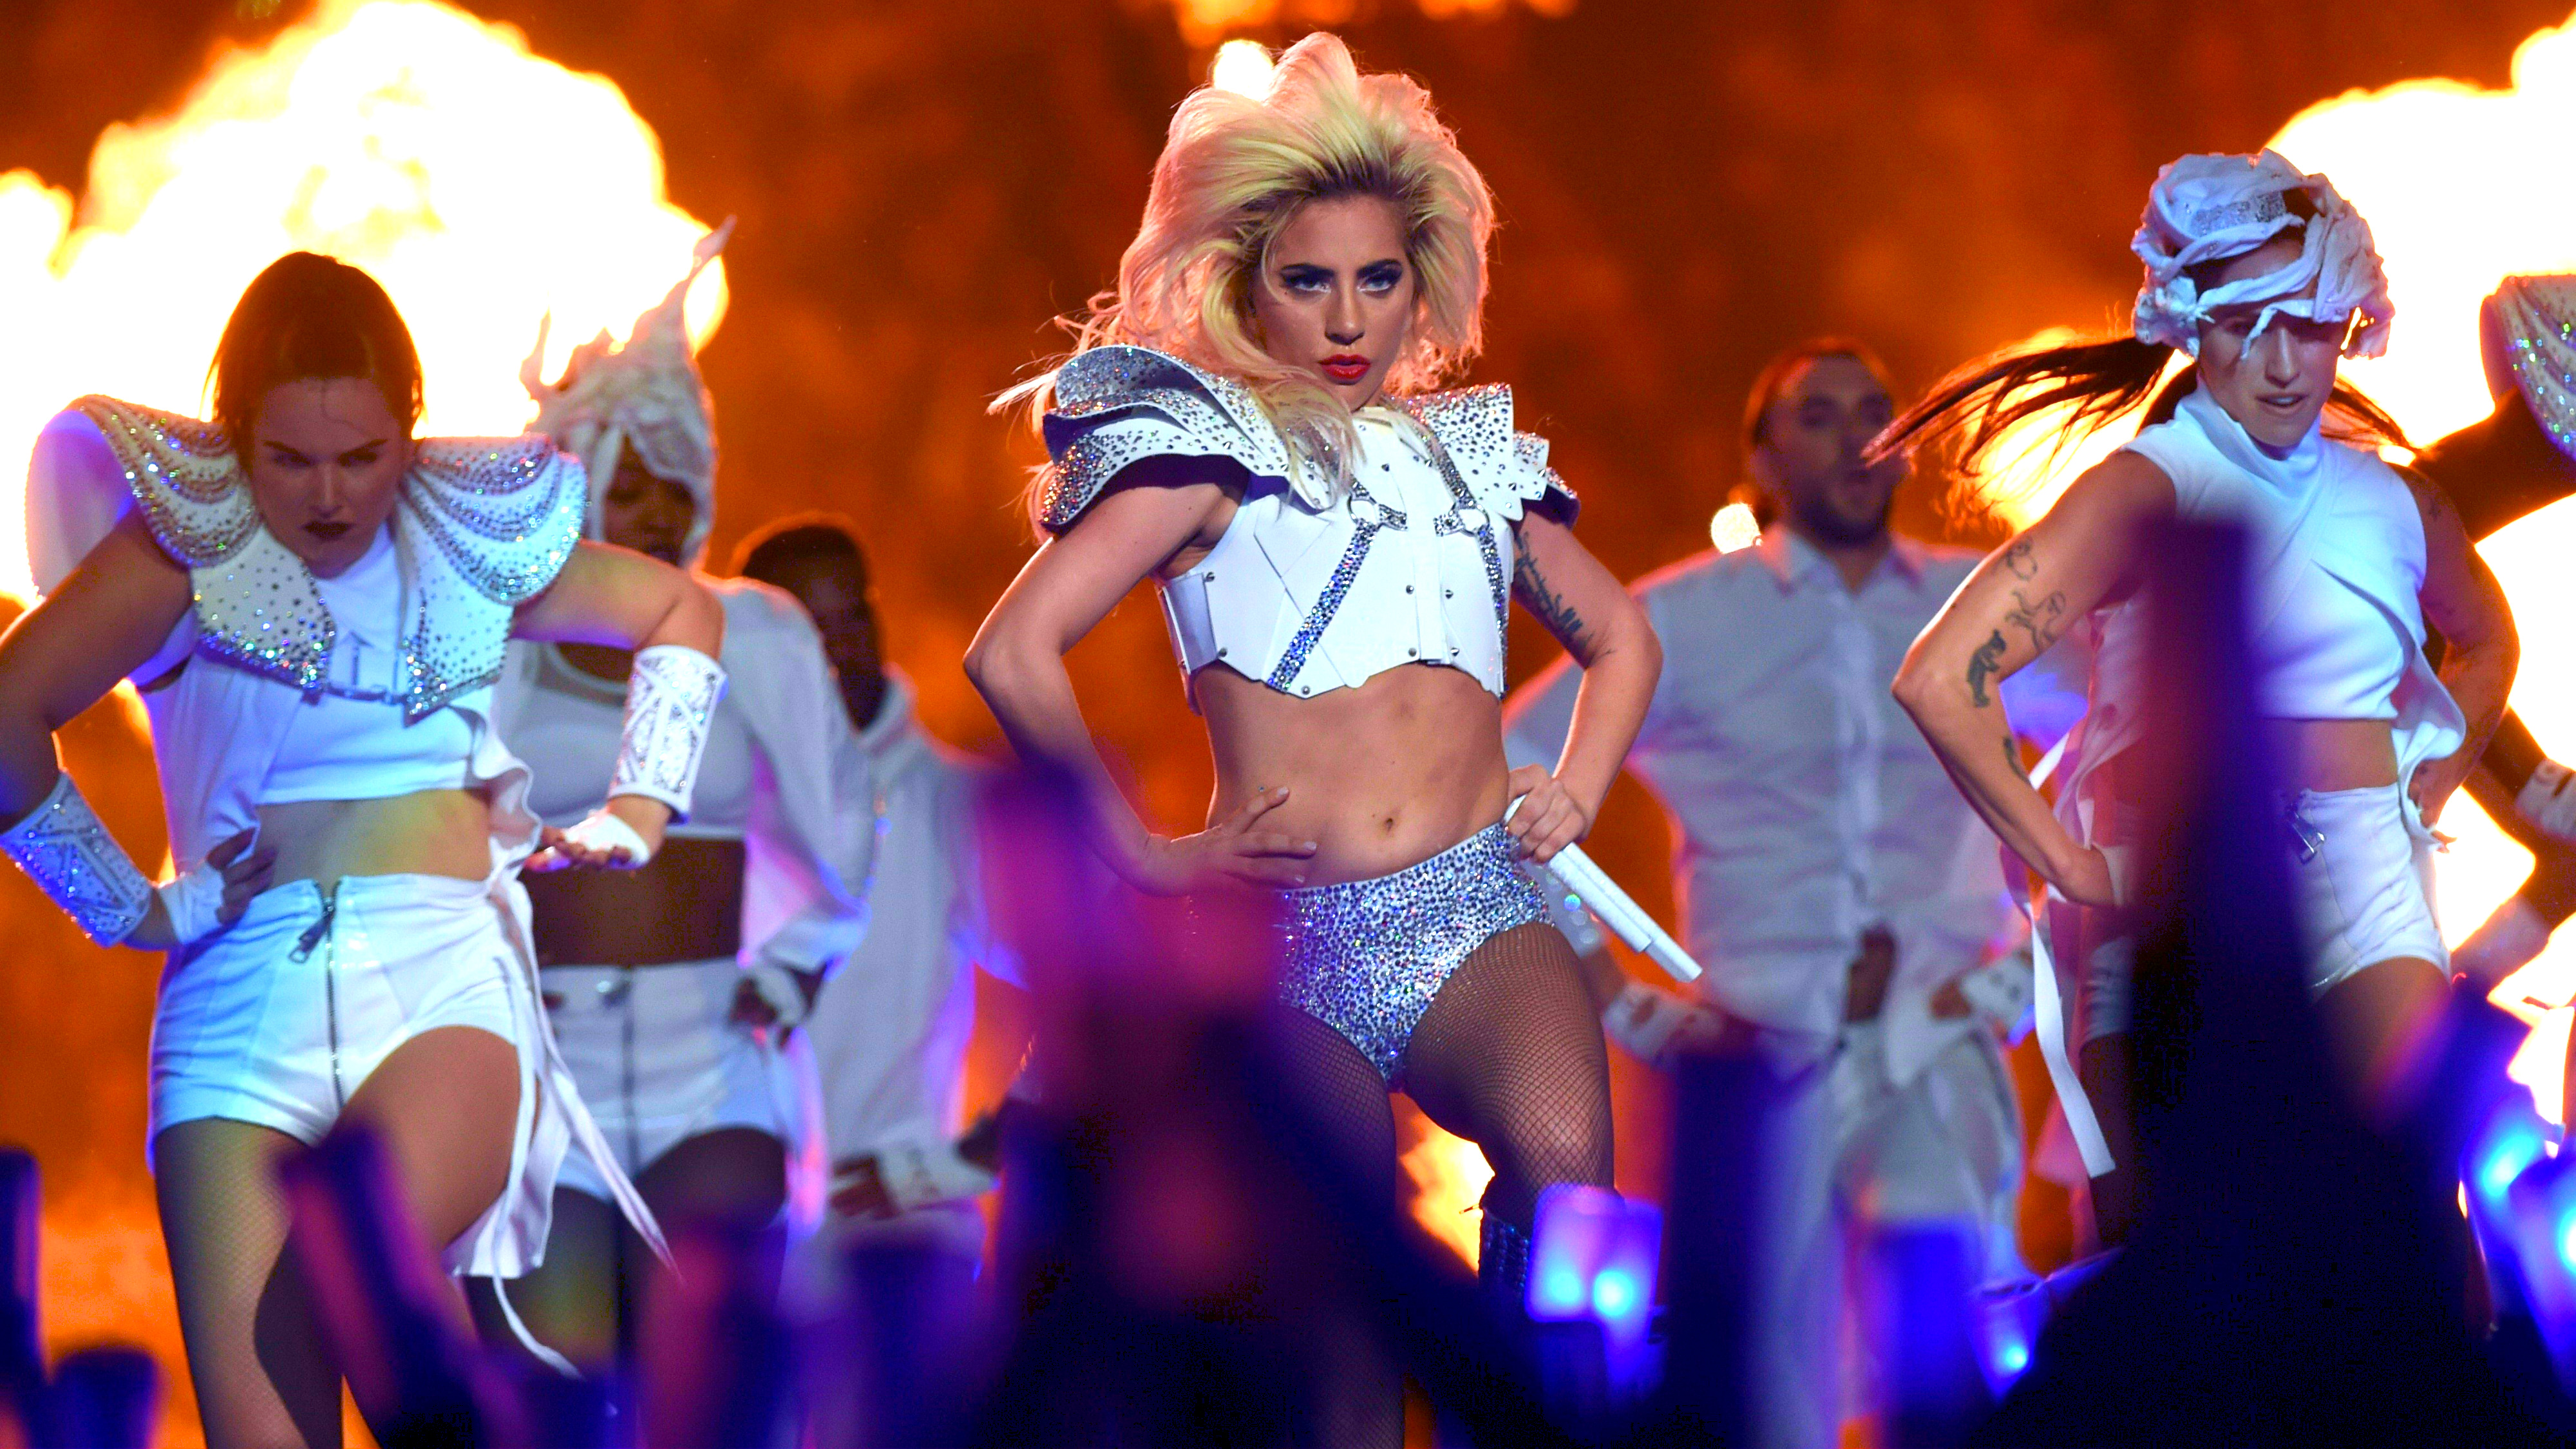 Lady Gaga performs during the Super Bowl half-time show at the NRG Stadium in Texas last Sunday